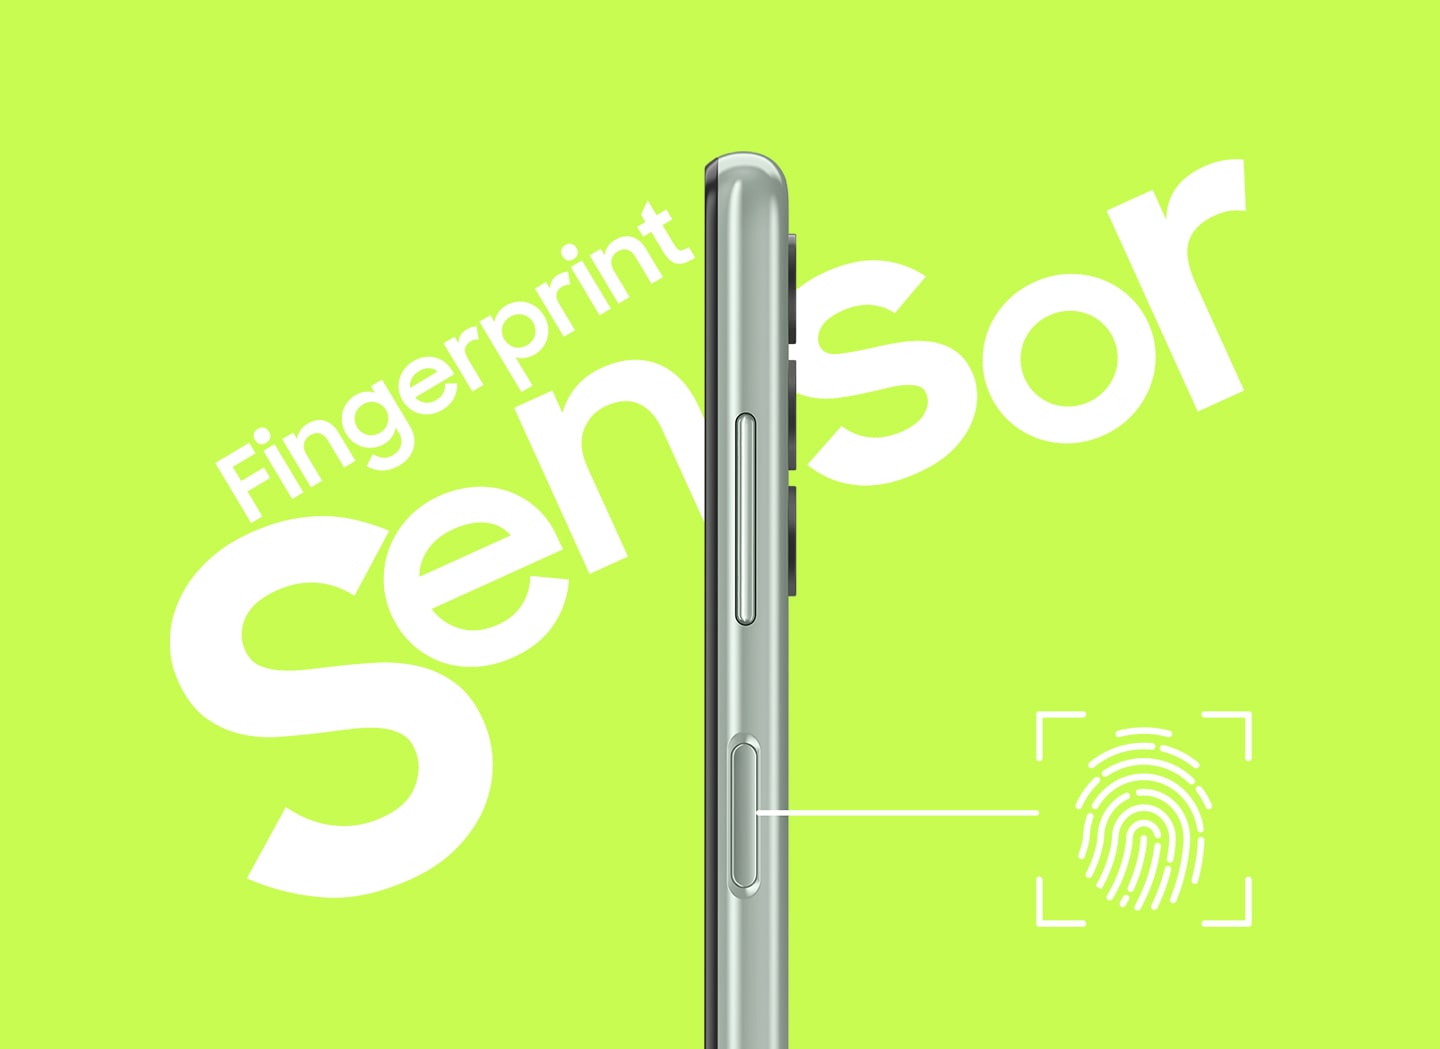 Unlock in just one touch with the side fingerprint sensor.